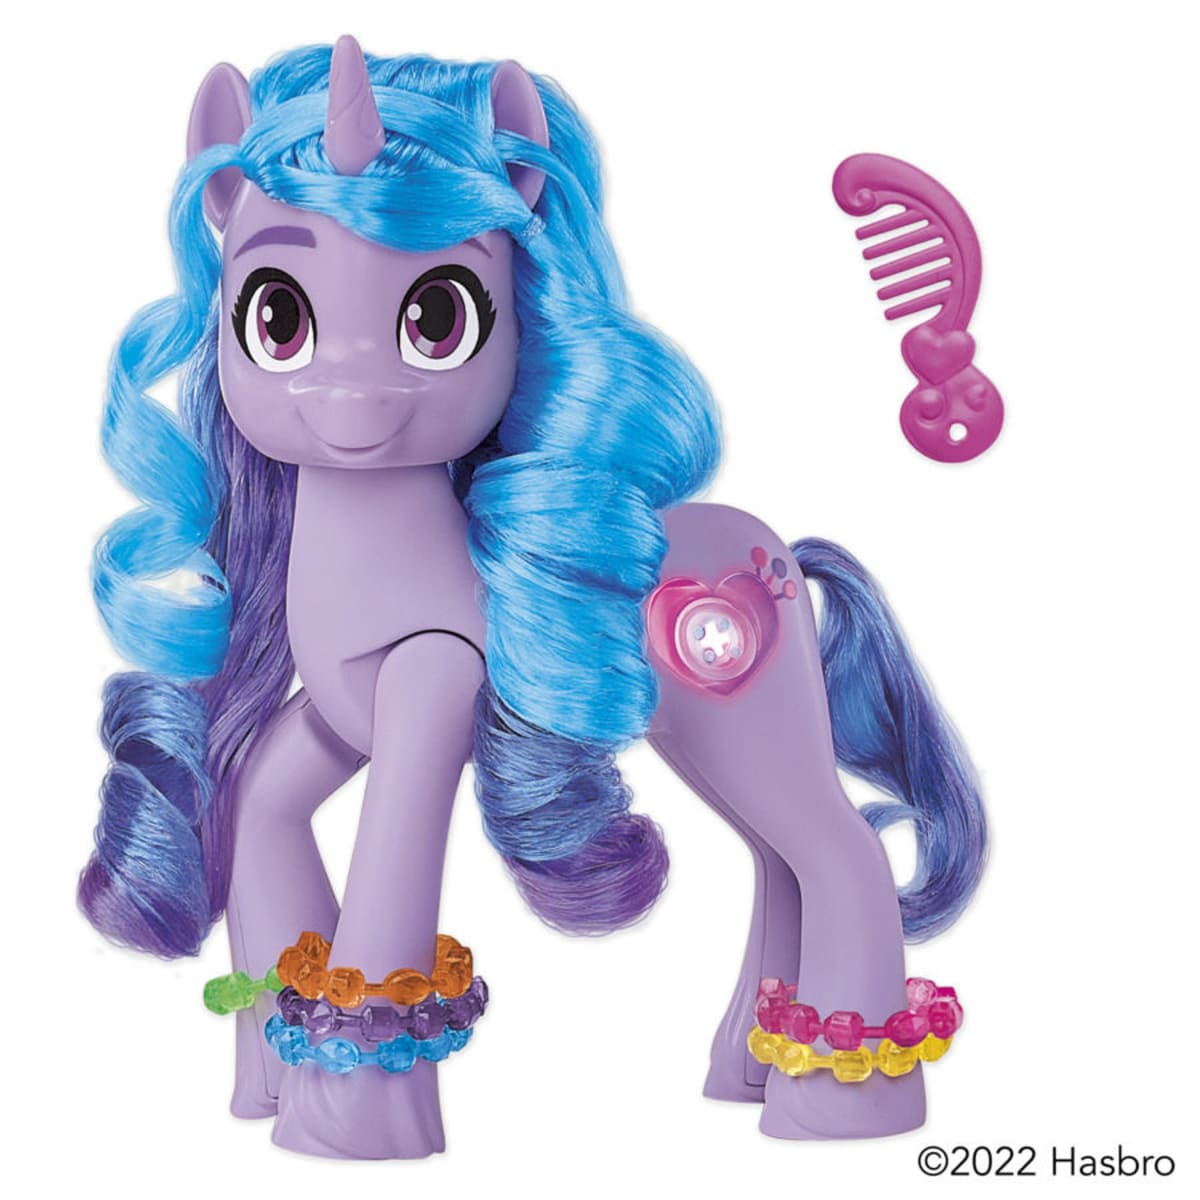 My Little Pony: Make Your Mark Toy See Your Sparkle Izzy Moonbow -- 8-Inch  Pony for Kids that Sings, Speaks, Lights Up - My Little Pony